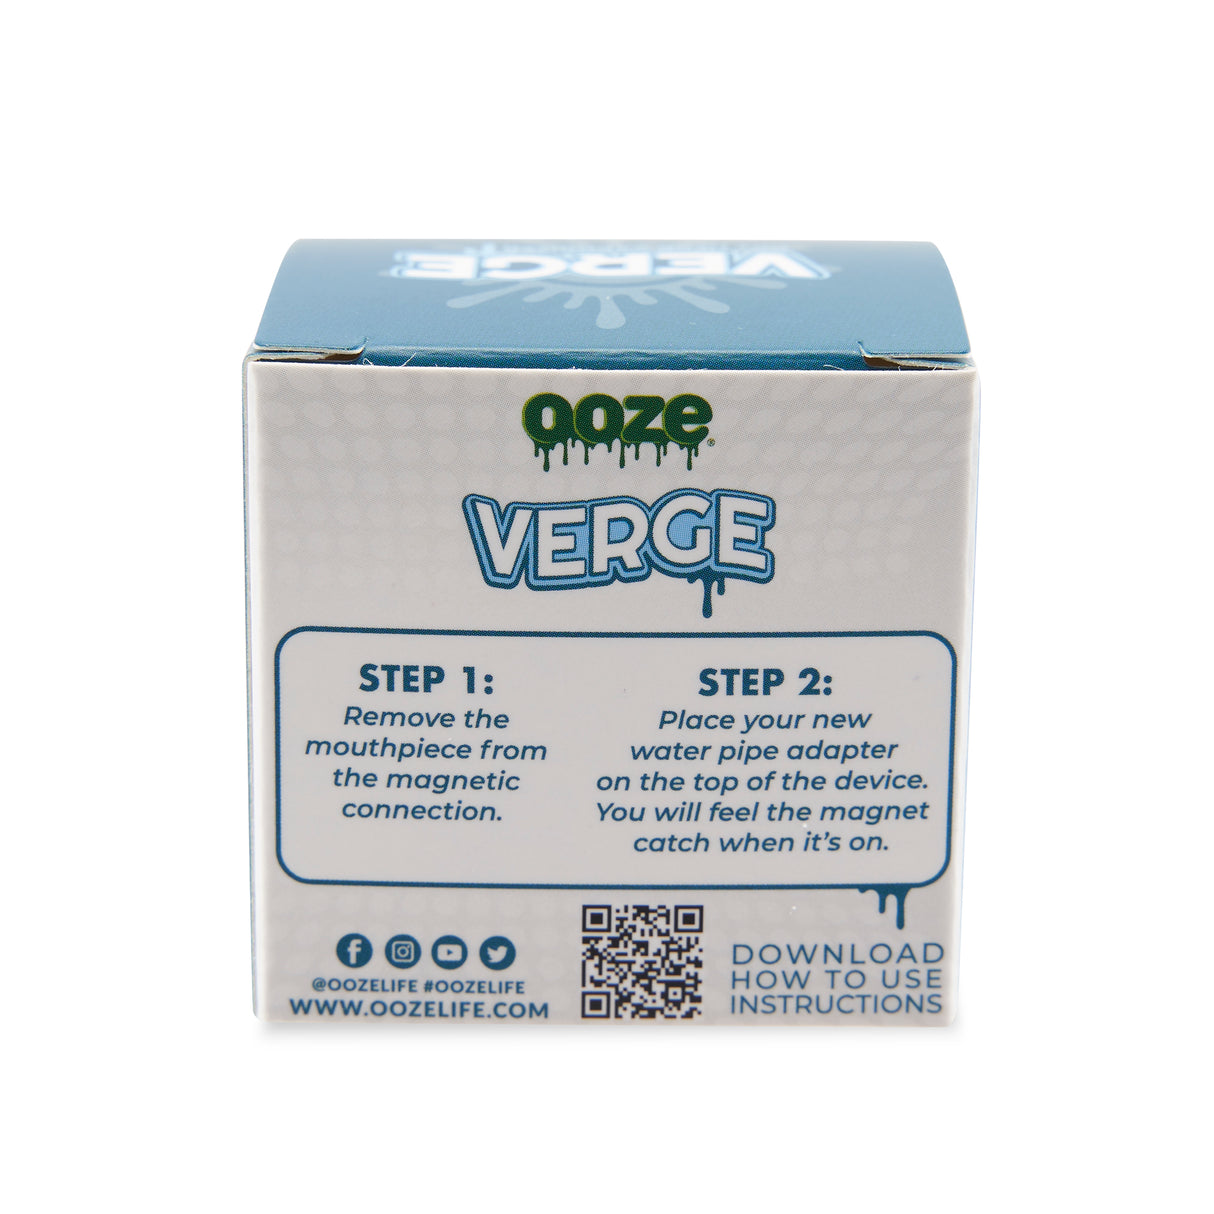 The back of the box for the Ooze Verge water pipe adapter.